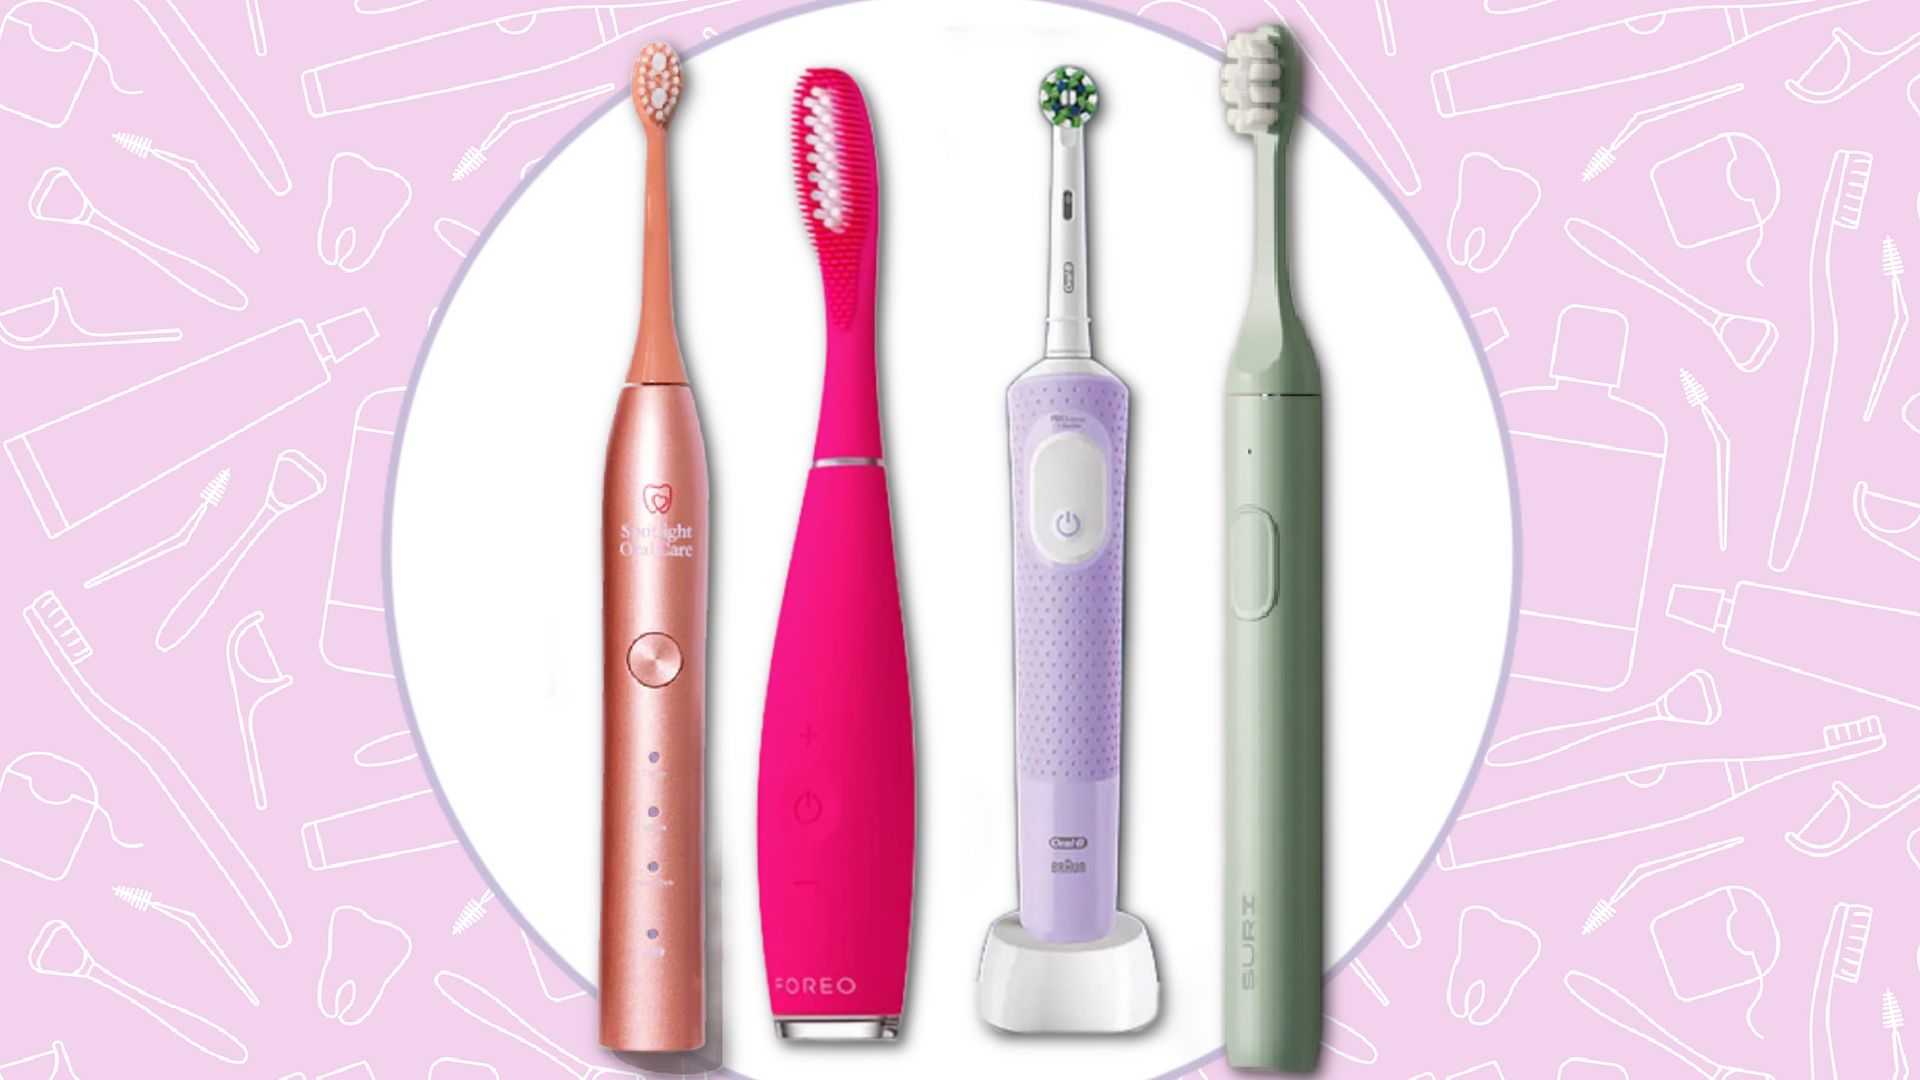 7 best electric toothbrushes plus expert advice so you can choose the one that's right for you